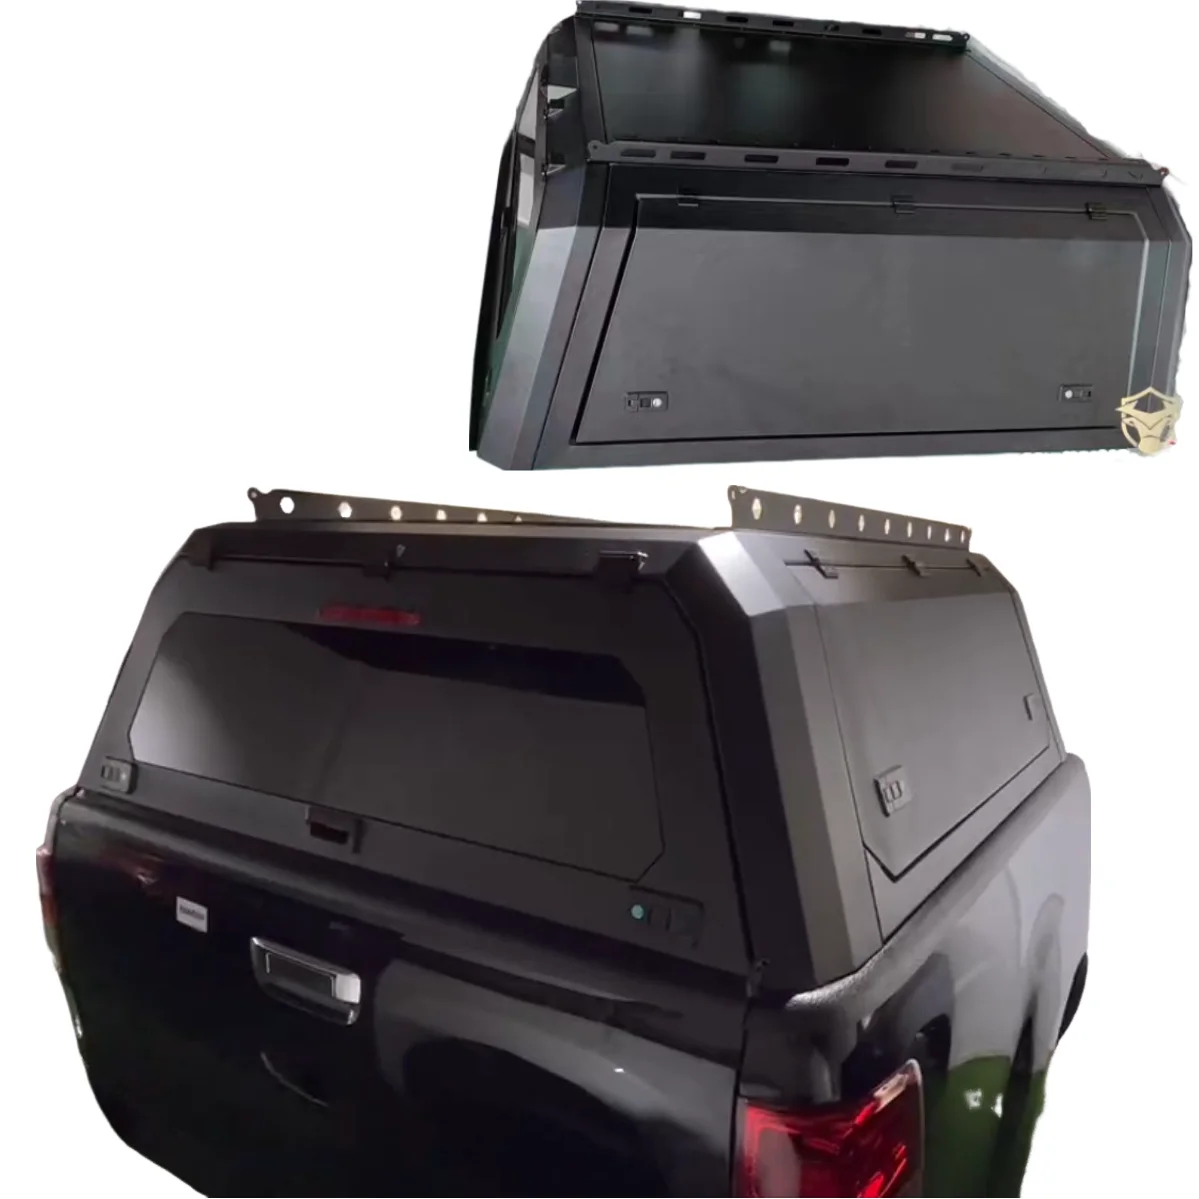 

Pickup truck topper hardtop with Emergency Recovery Board hard top for navara np300 canopy for Ranger Hilux Revo Dmax